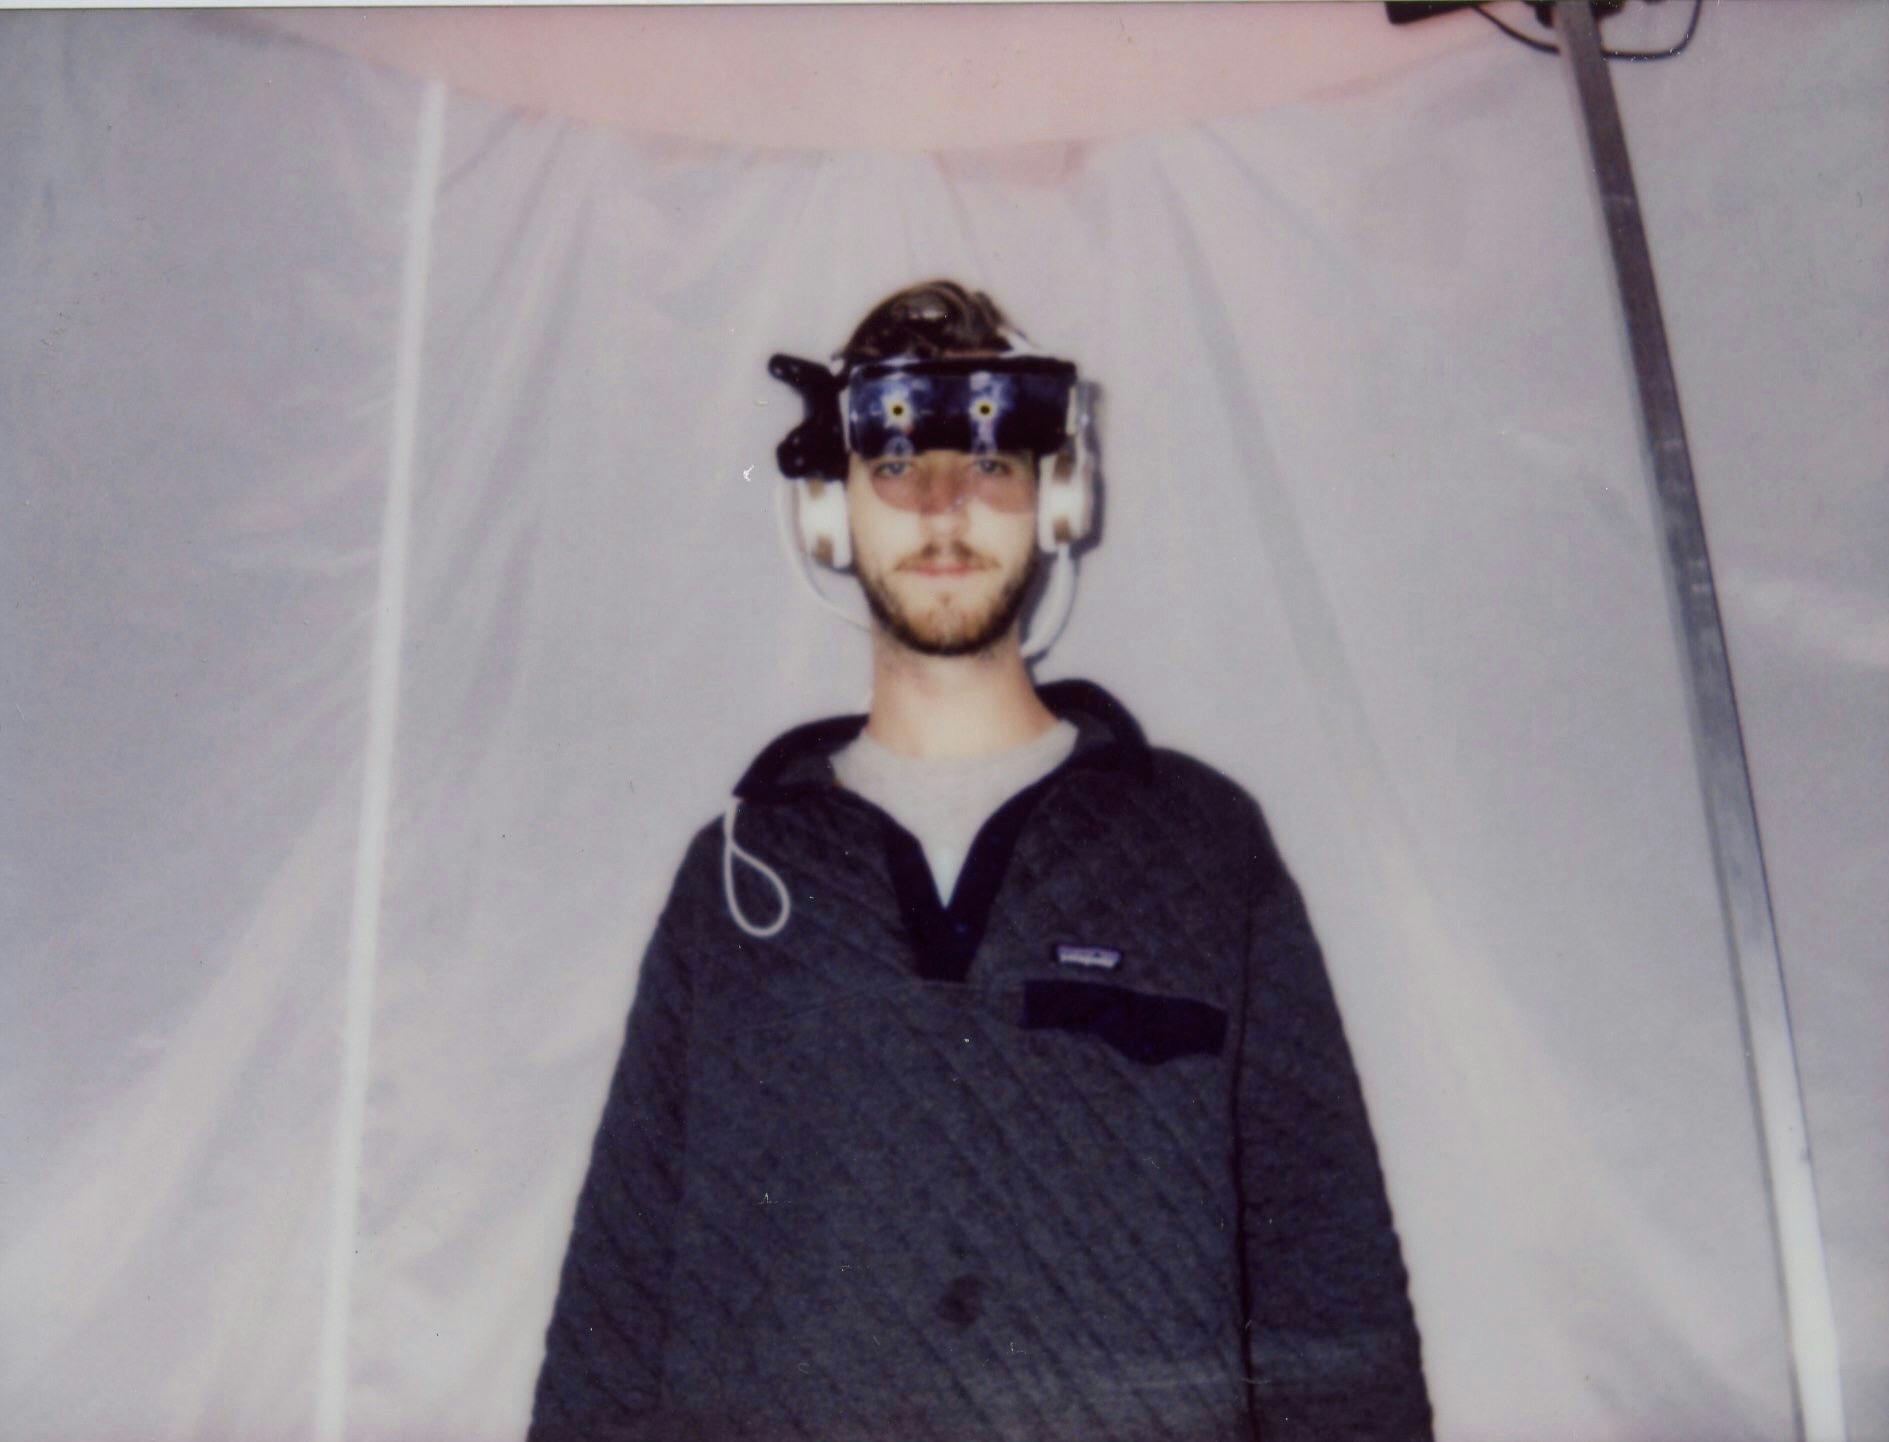 A young man in AR goggles and headphones